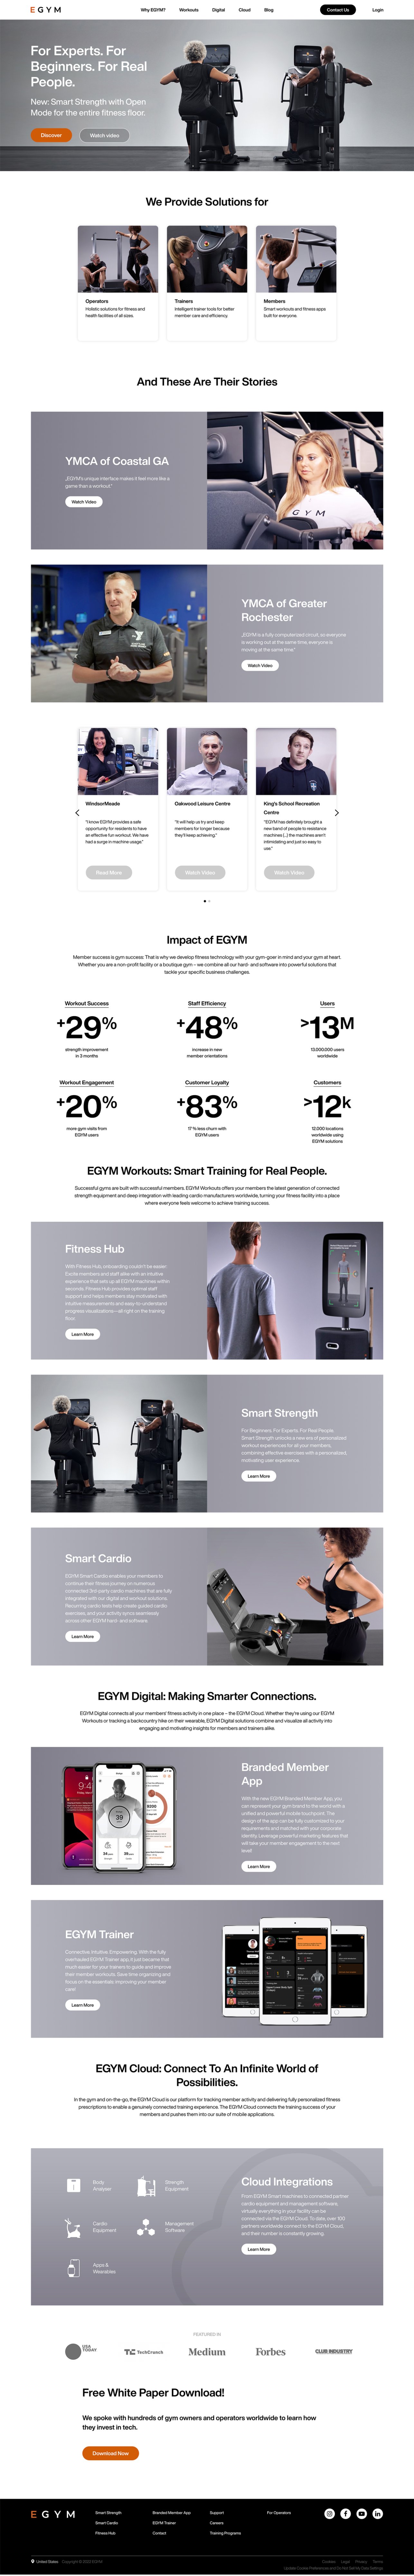 EGYM-Smart-Gym-Solutions-Fitness-Technology-Scroll-final